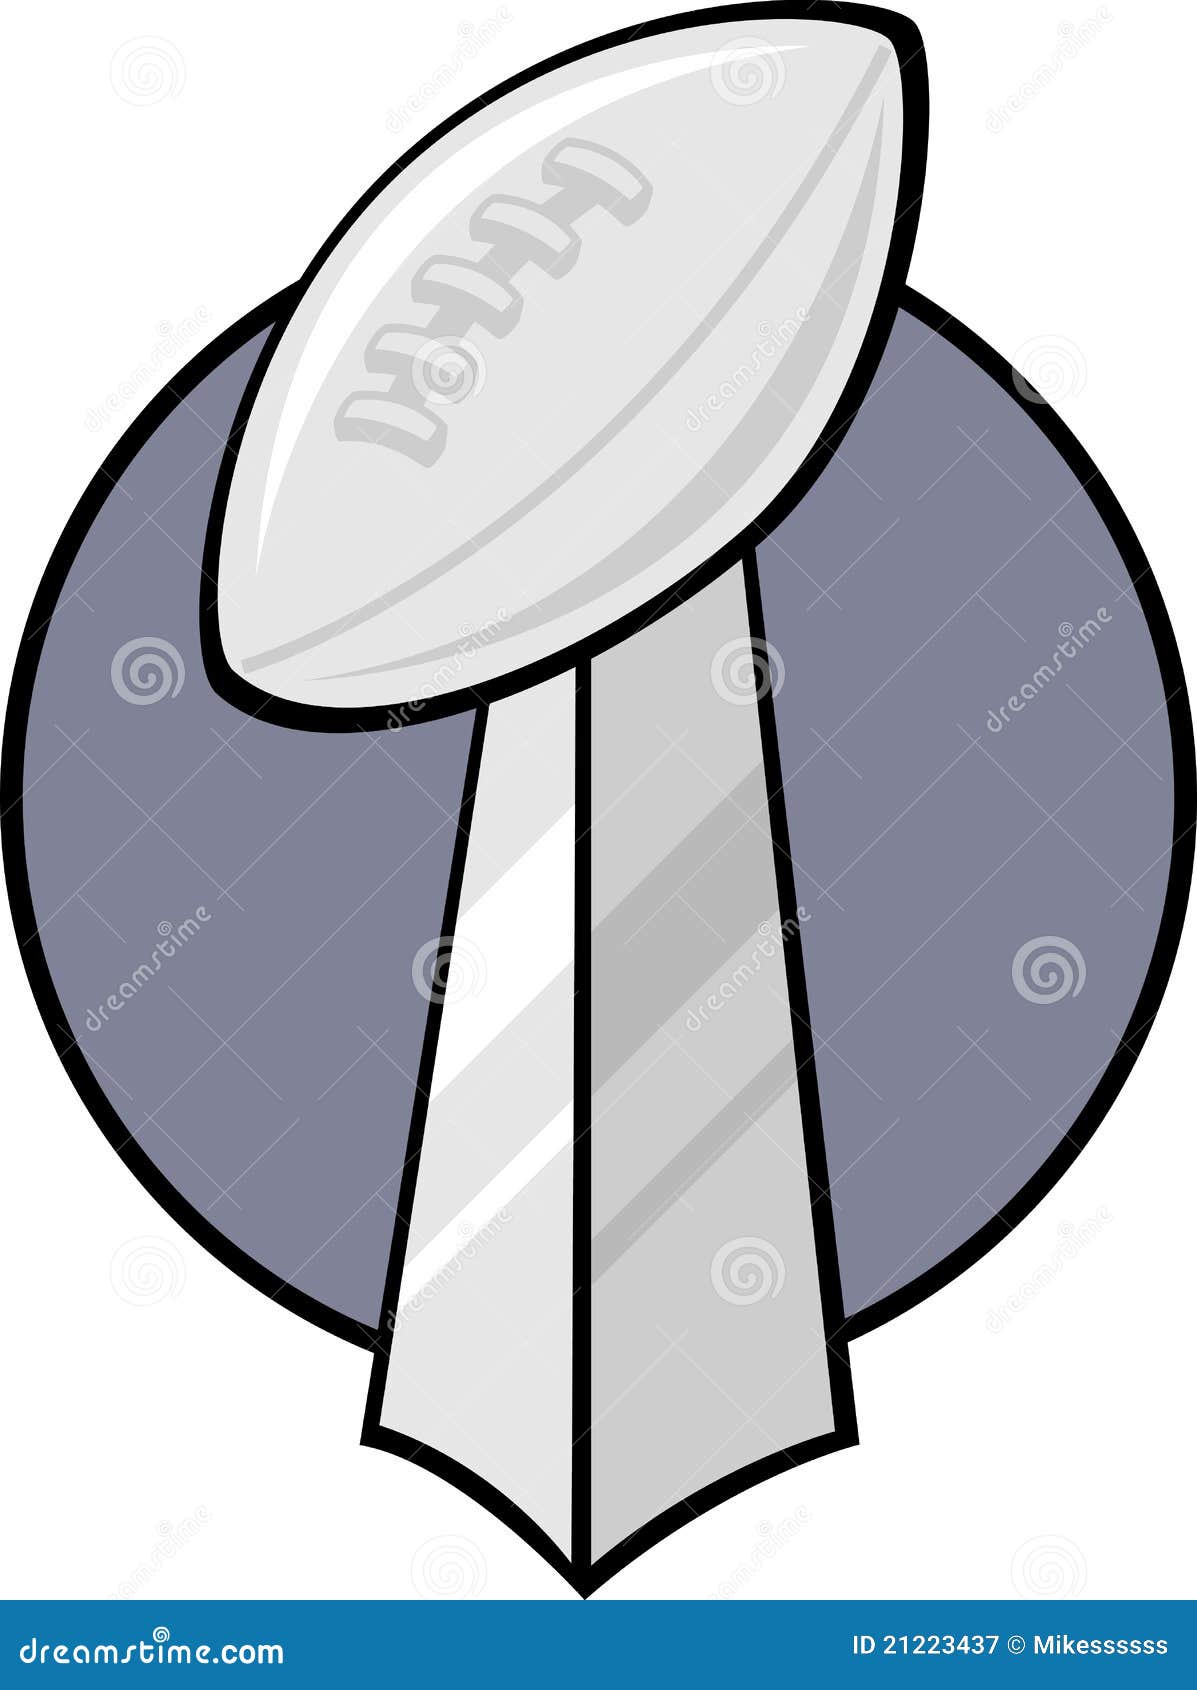 clipart football trophy - photo #37